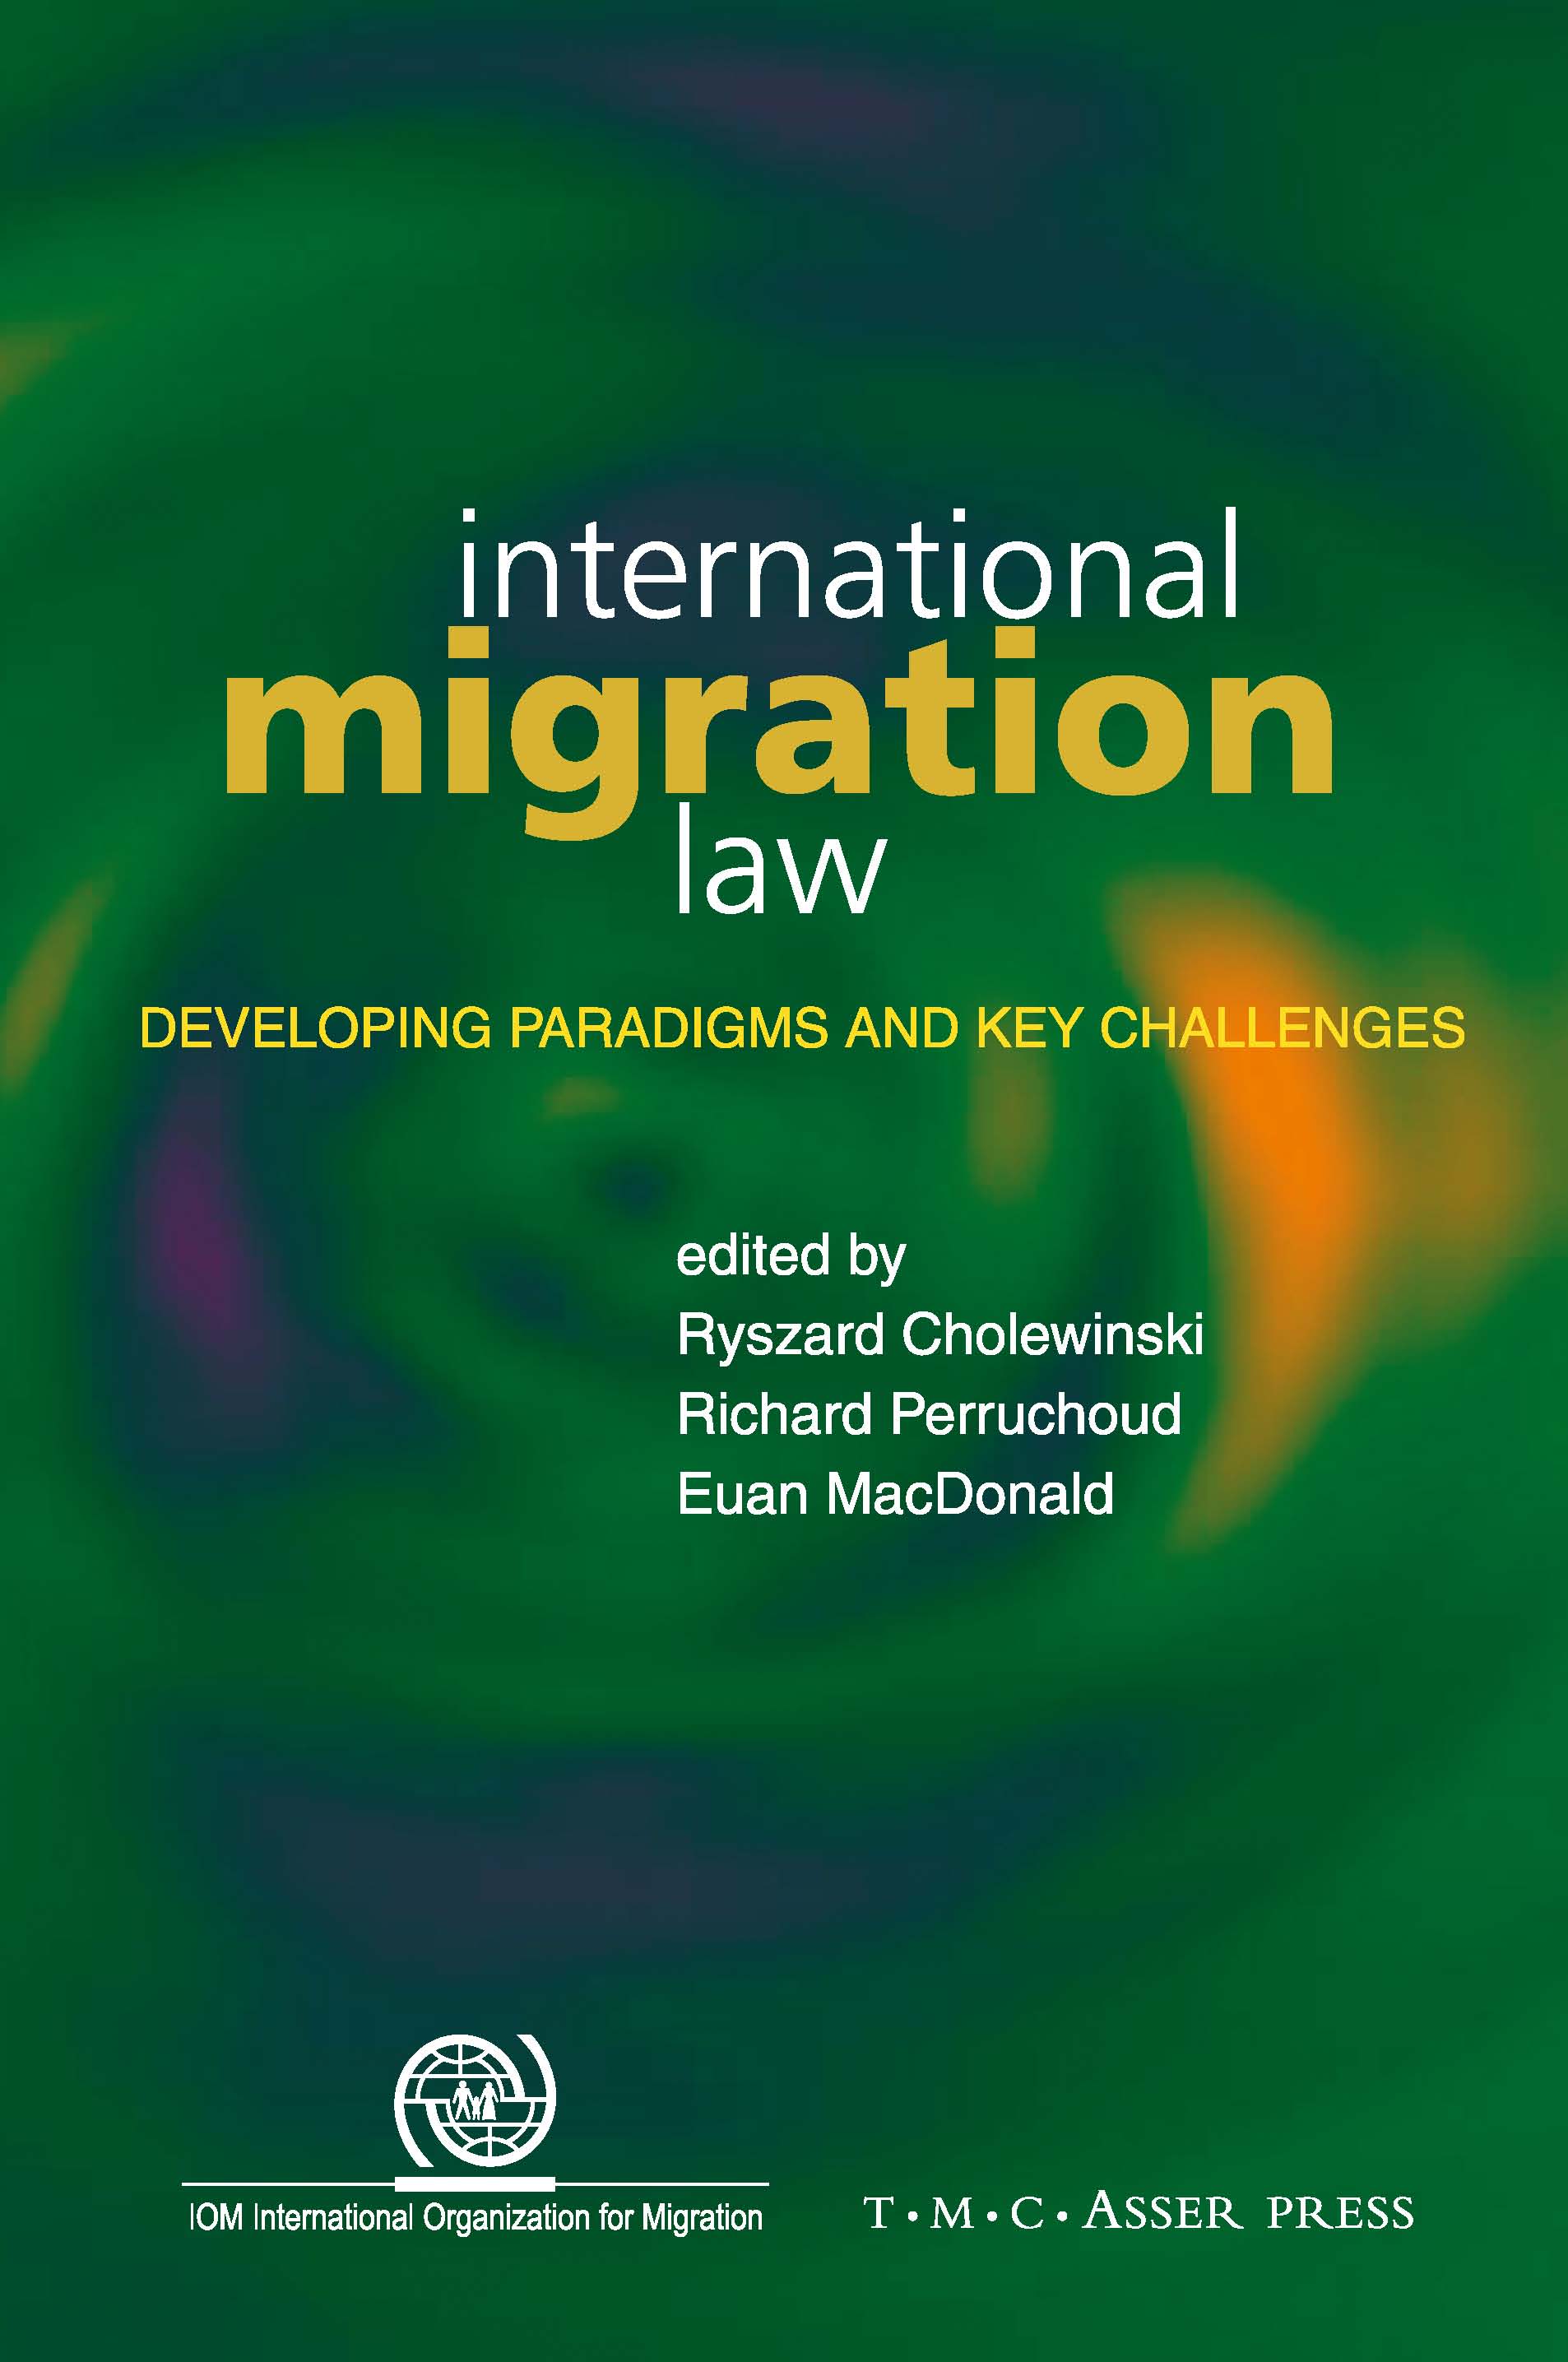 International Migration Law - Developing Paradigms and Key Challenges